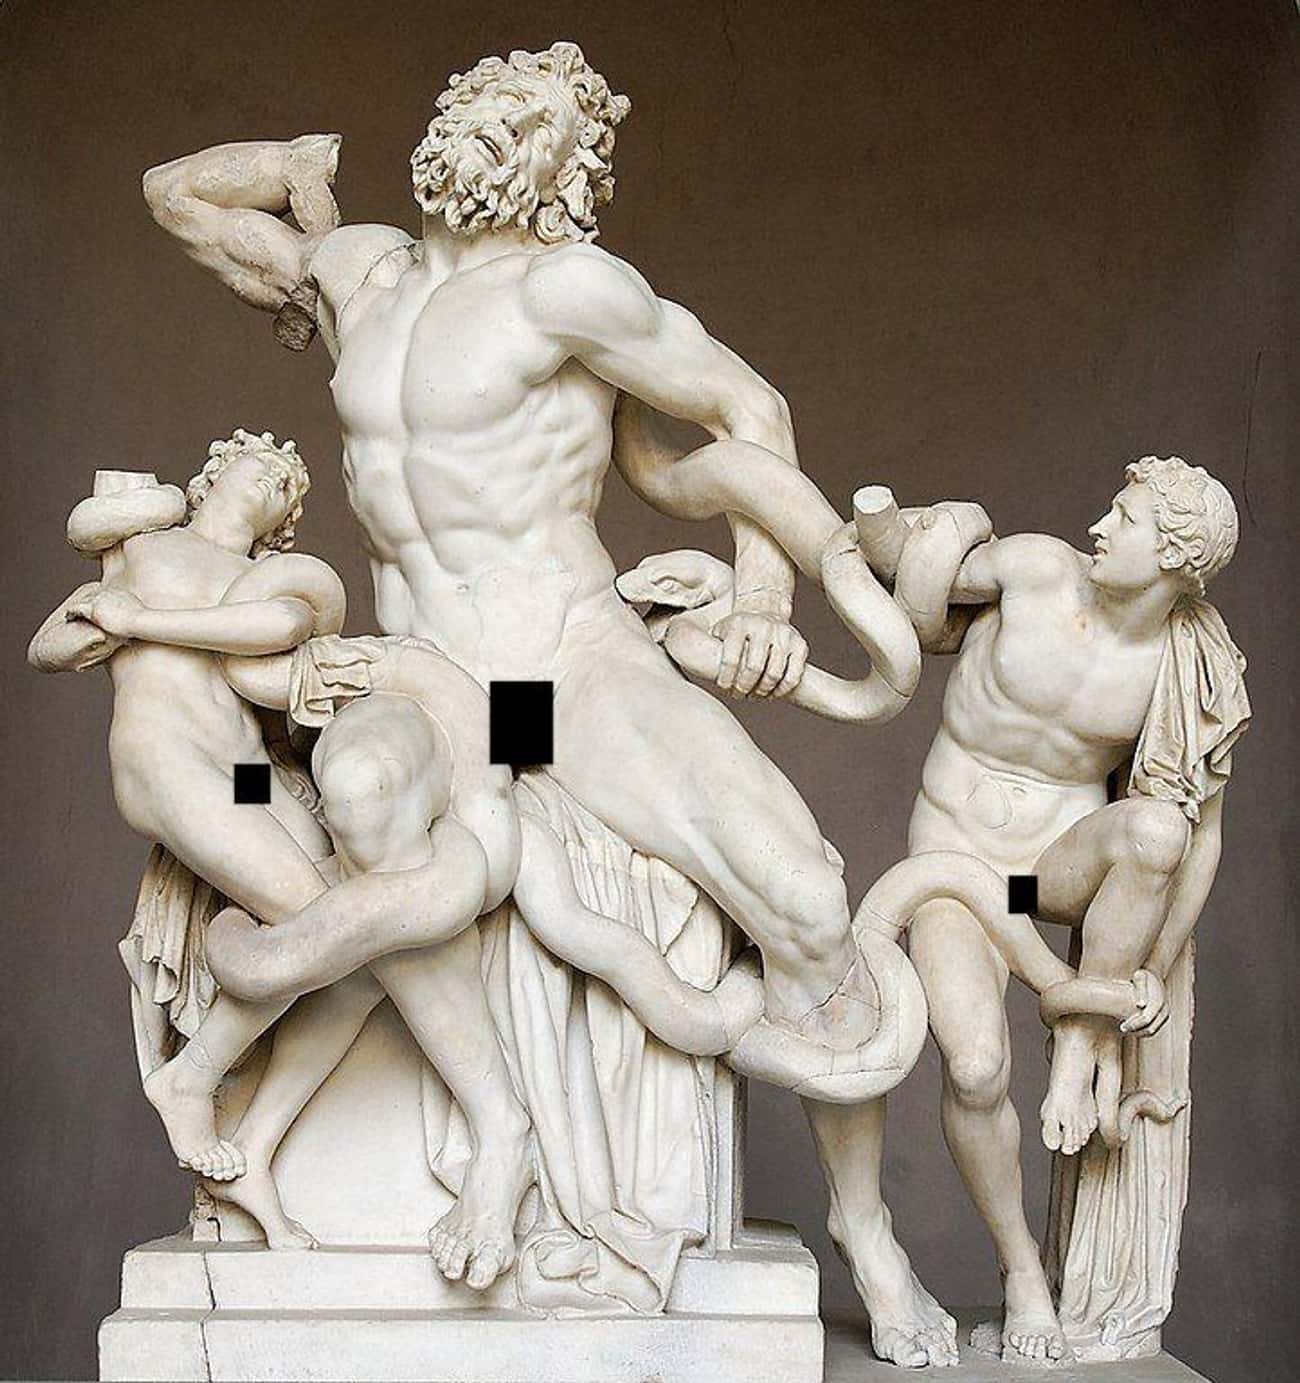 Michelangelo Believed The Missing Arm Of 'Laocoön' Was Bent Backwards - And Was Proven Right 400 Years Later